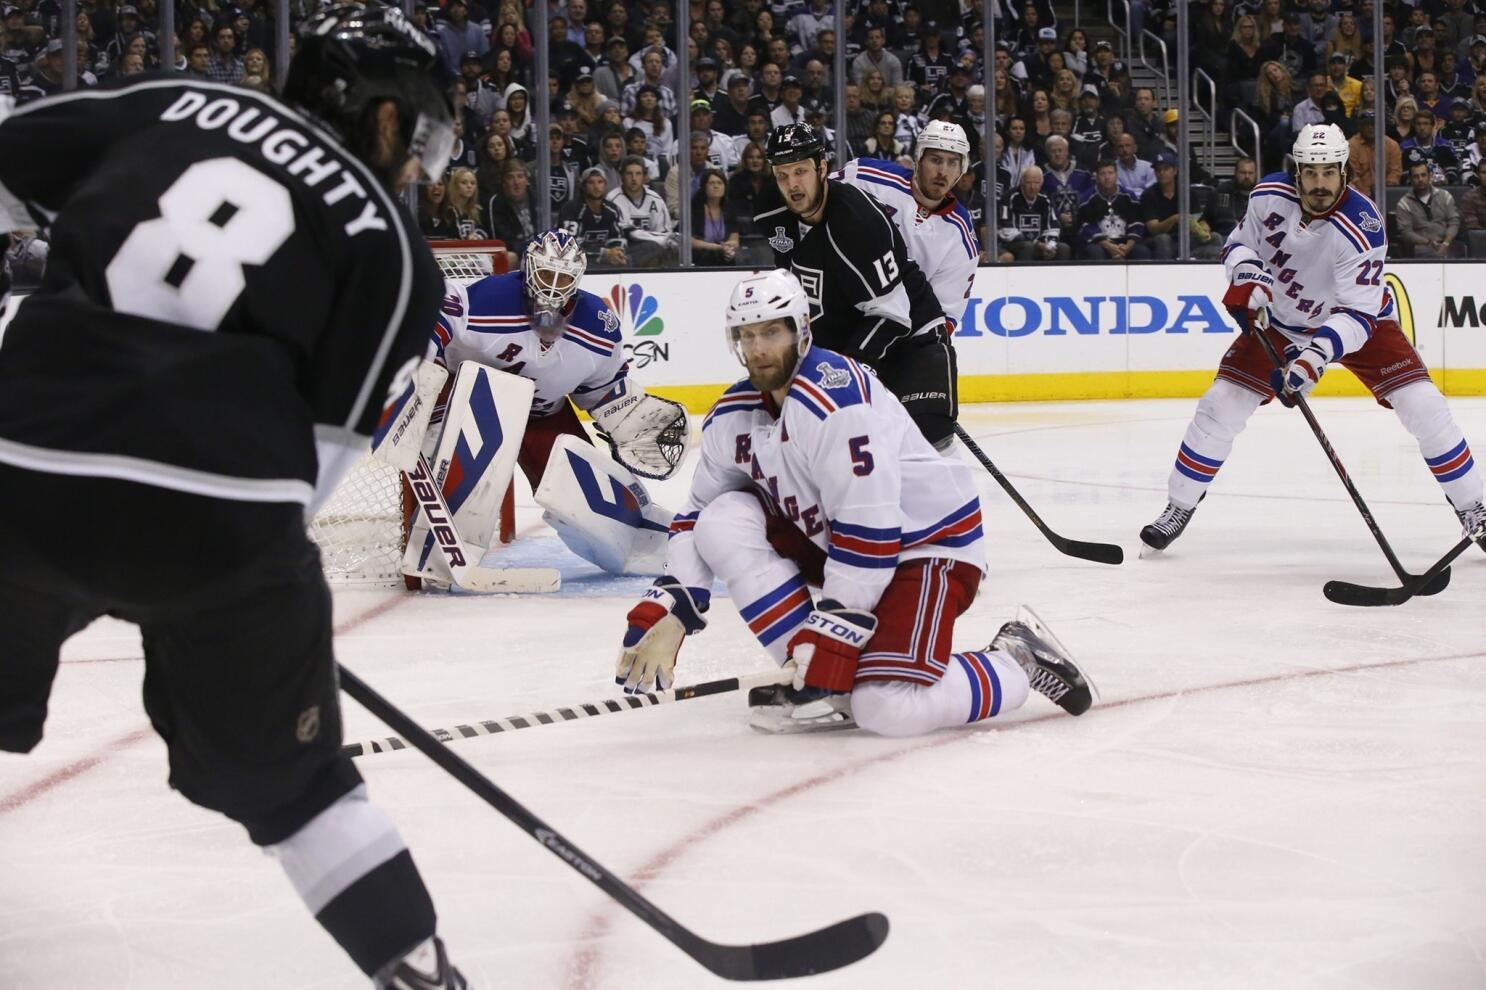 LA Kings win Stanley Cup in dramatic double OT victory over Rangers